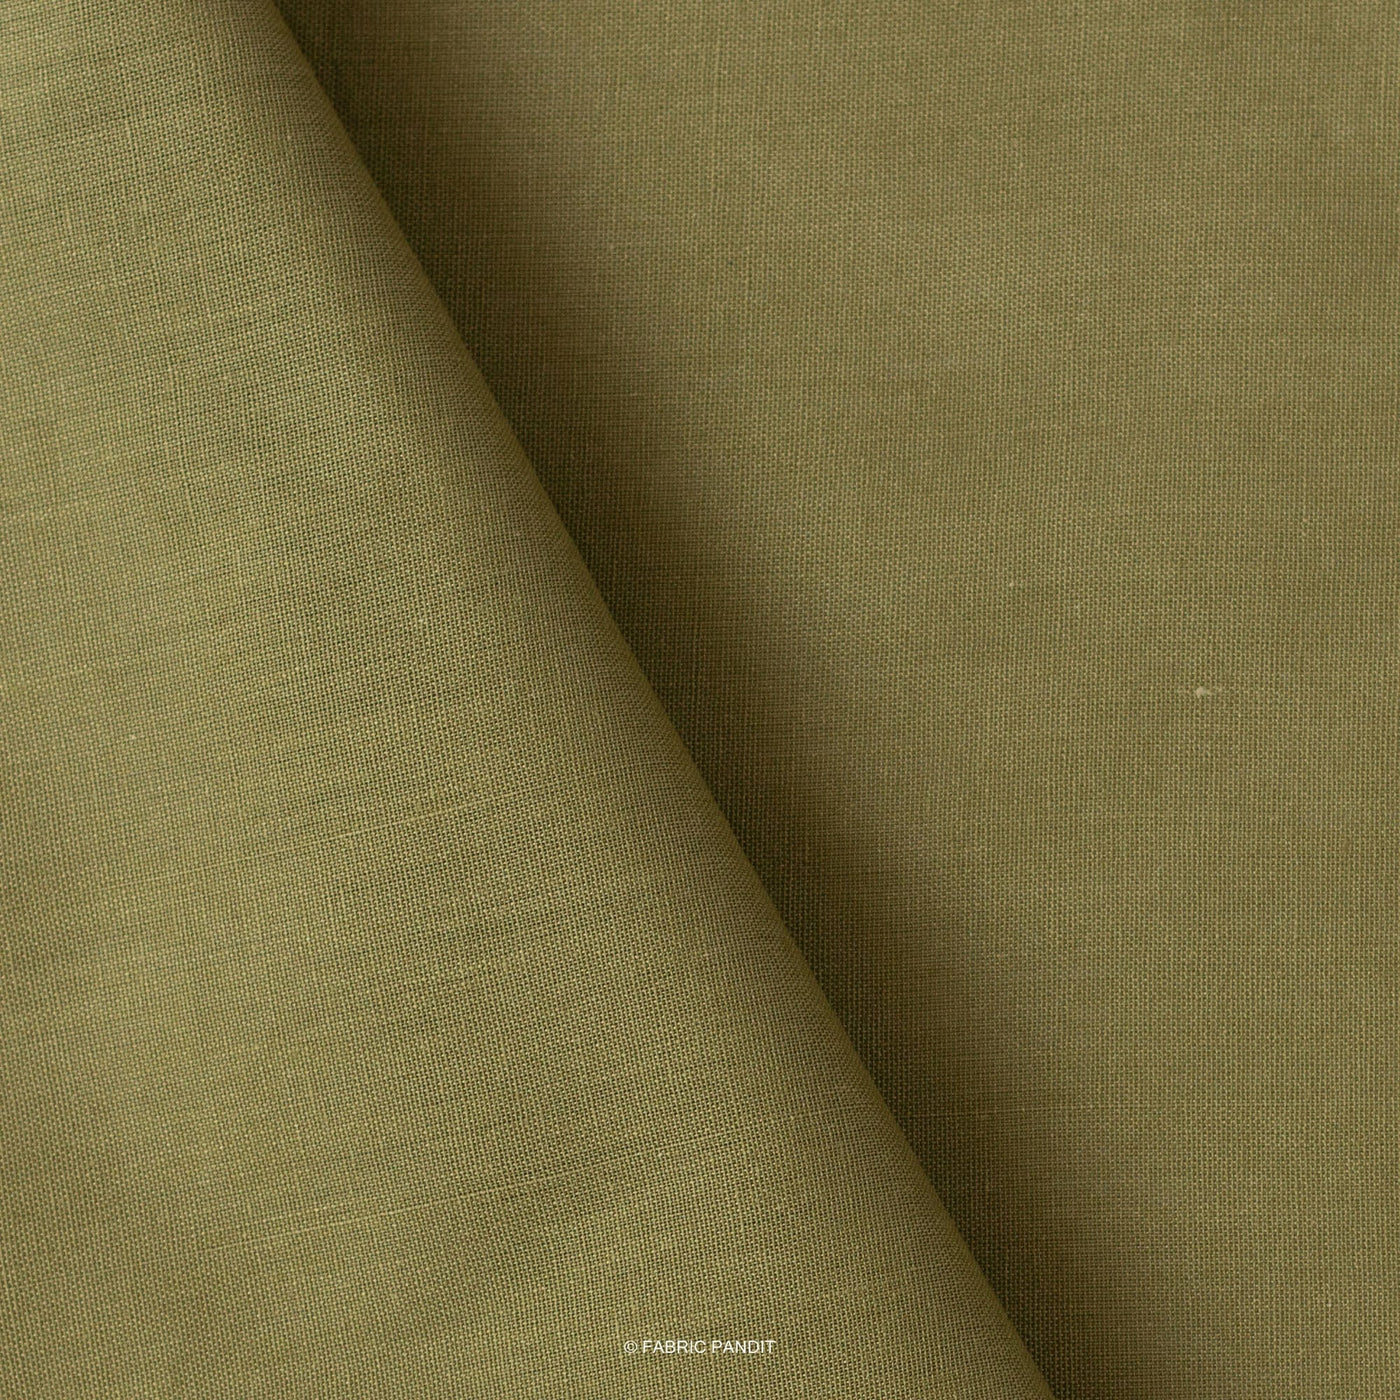 Fabric Pandit Cut Piece (CUT PIECE) Military Green Color Pure Cotton Linen Fabric  (Width 58 Inches)